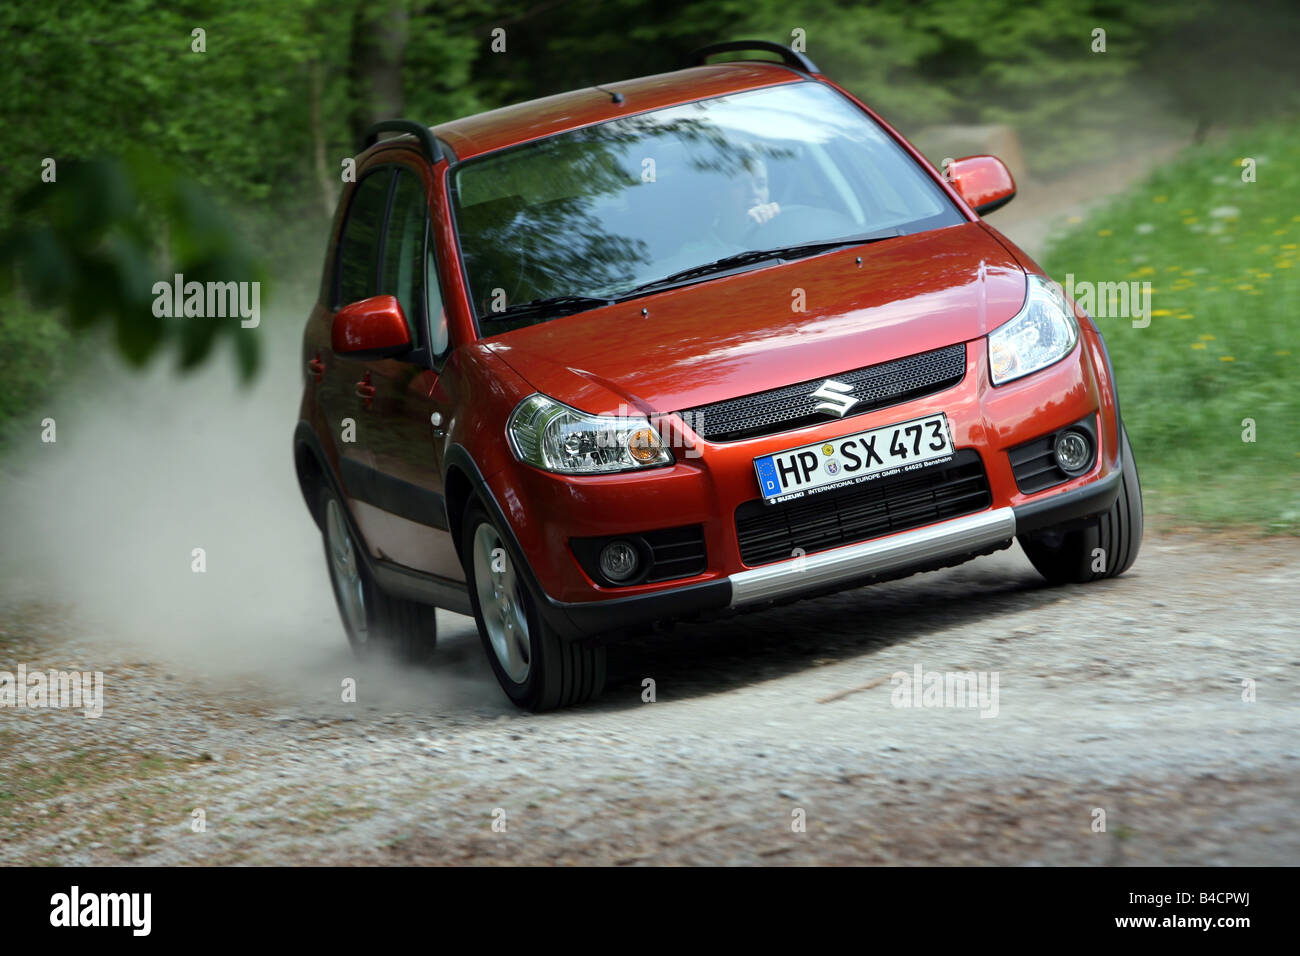 Car, Suzuki SX4 1.9 DDiS-AWD, model year 2006-, orange , driving, diagonal from the front, frontal view, country road Stock Photo